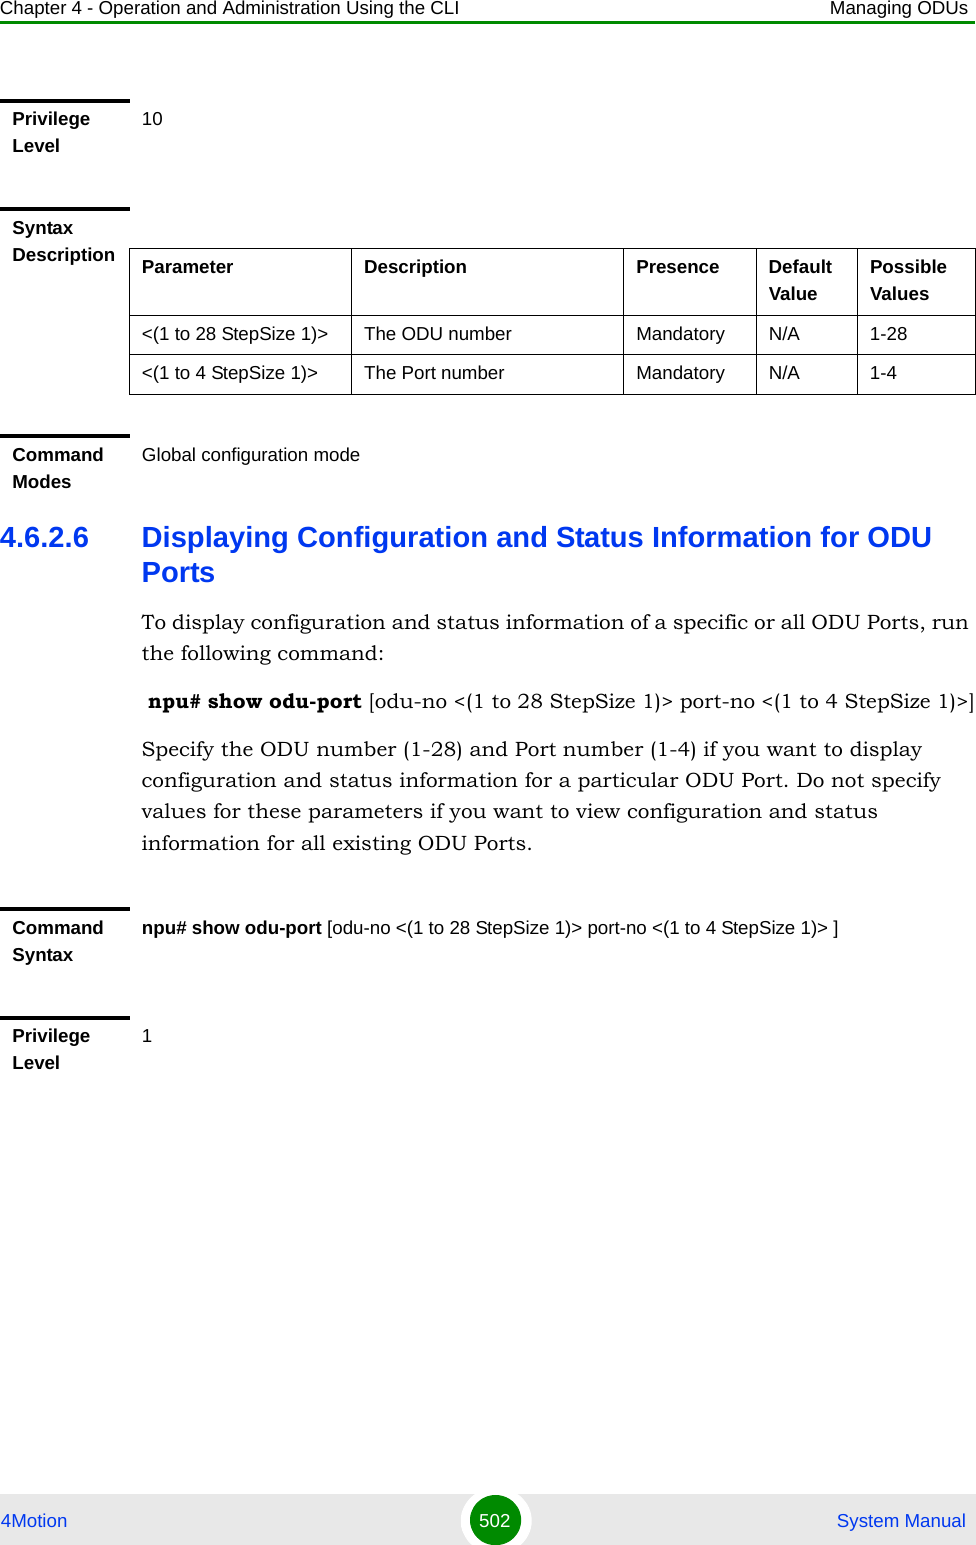 Chapter 4 - Operation and Administration Using the CLI Managing ODUs4Motion 502  System Manual4.6.2.6 Displaying Configuration and Status Information for ODU PortsTo display configuration and status information of a specific or all ODU Ports, run the following command: npu# show odu-port [odu-no &lt;(1 to 28 StepSize 1)&gt; port-no &lt;(1 to 4 StepSize 1)&gt;]Specify the ODU number (1-28) and Port number (1-4) if you want to display configuration and status information for a particular ODU Port. Do not specify values for these parameters if you want to view configuration and status information for all existing ODU Ports.Privilege Level10Syntax Description Parameter Description Presence Default ValuePossible Values&lt;(1 to 28 StepSize 1)&gt; The ODU number  Mandatory N/A 1-28&lt;(1 to 4 StepSize 1)&gt; The Port number  Mandatory N/A 1-4Command ModesGlobal configuration modeCommand Syntaxnpu# show odu-port [odu-no &lt;(1 to 28 StepSize 1)&gt; port-no &lt;(1 to 4 StepSize 1)&gt; ]Privilege Level1